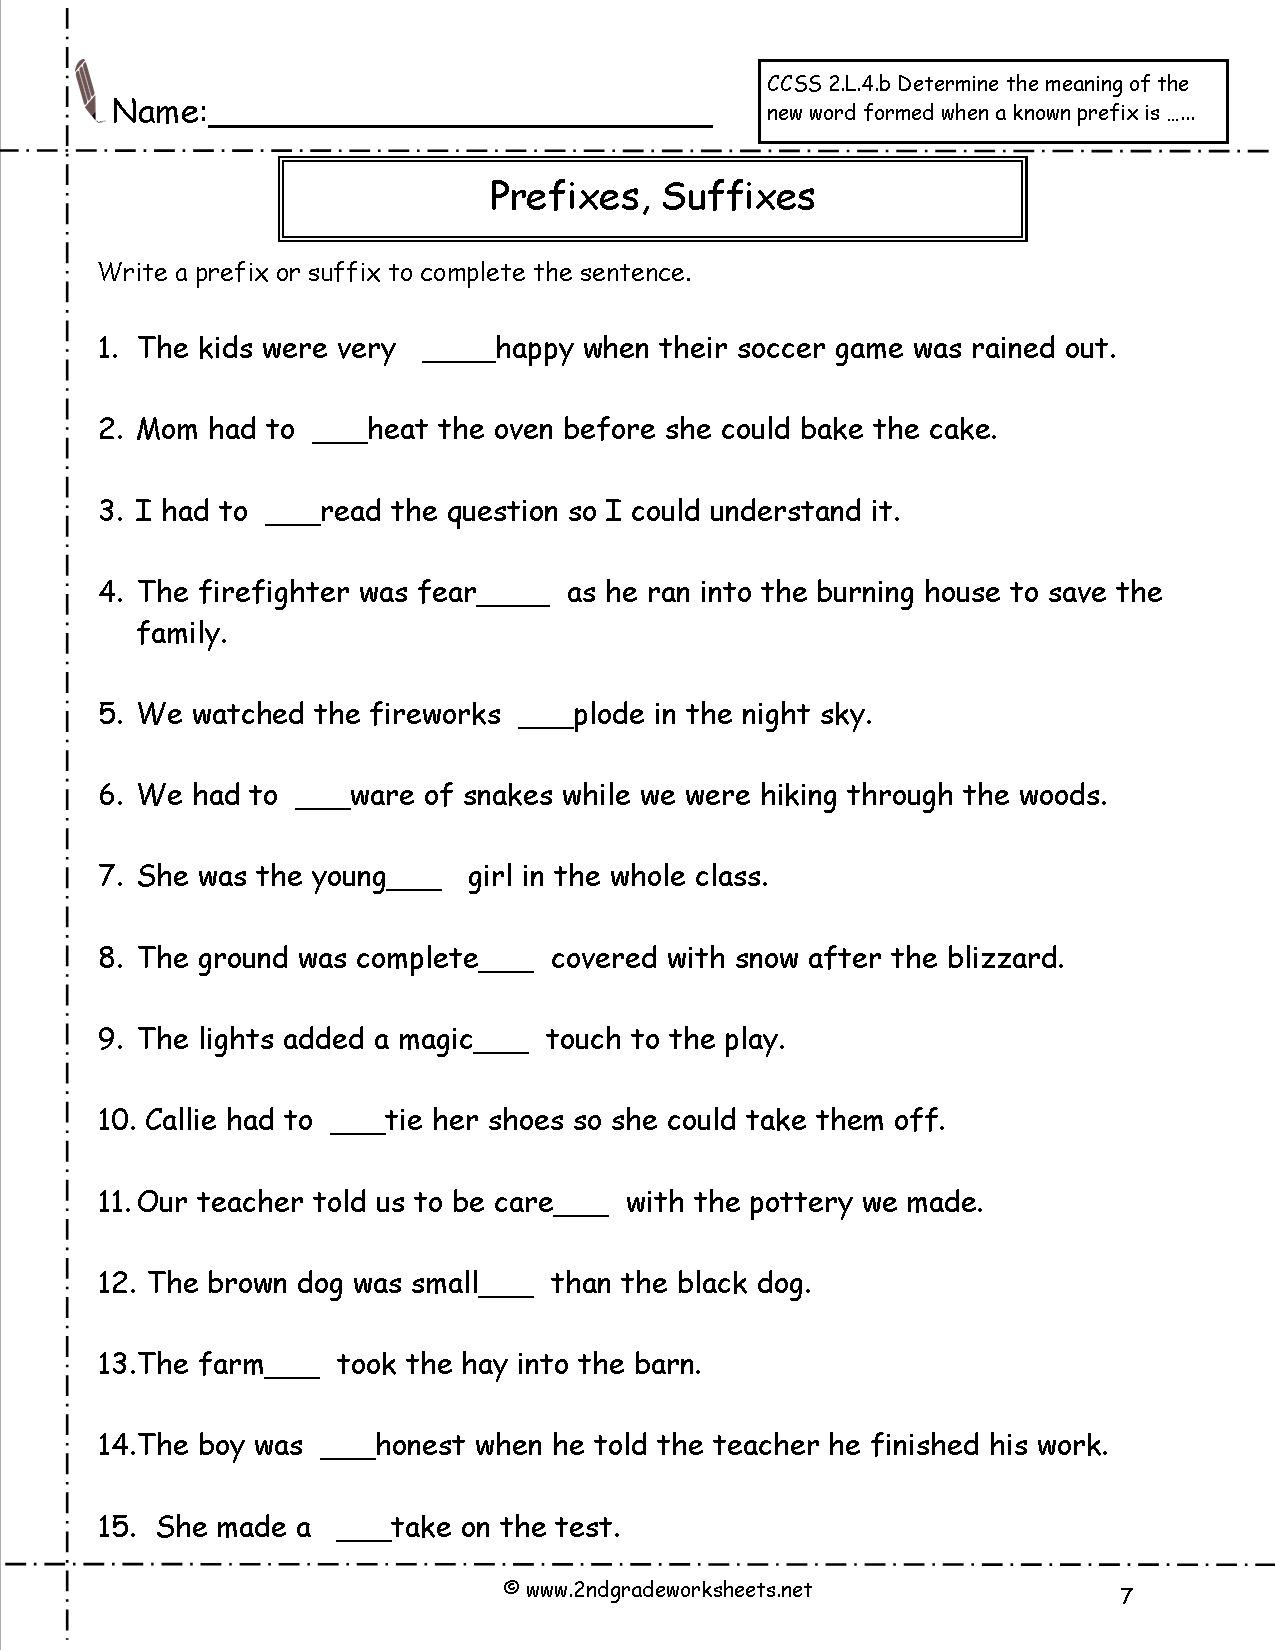 Prefixes and Suffixes Worksheet Suffixes Worksheets 7th Grade